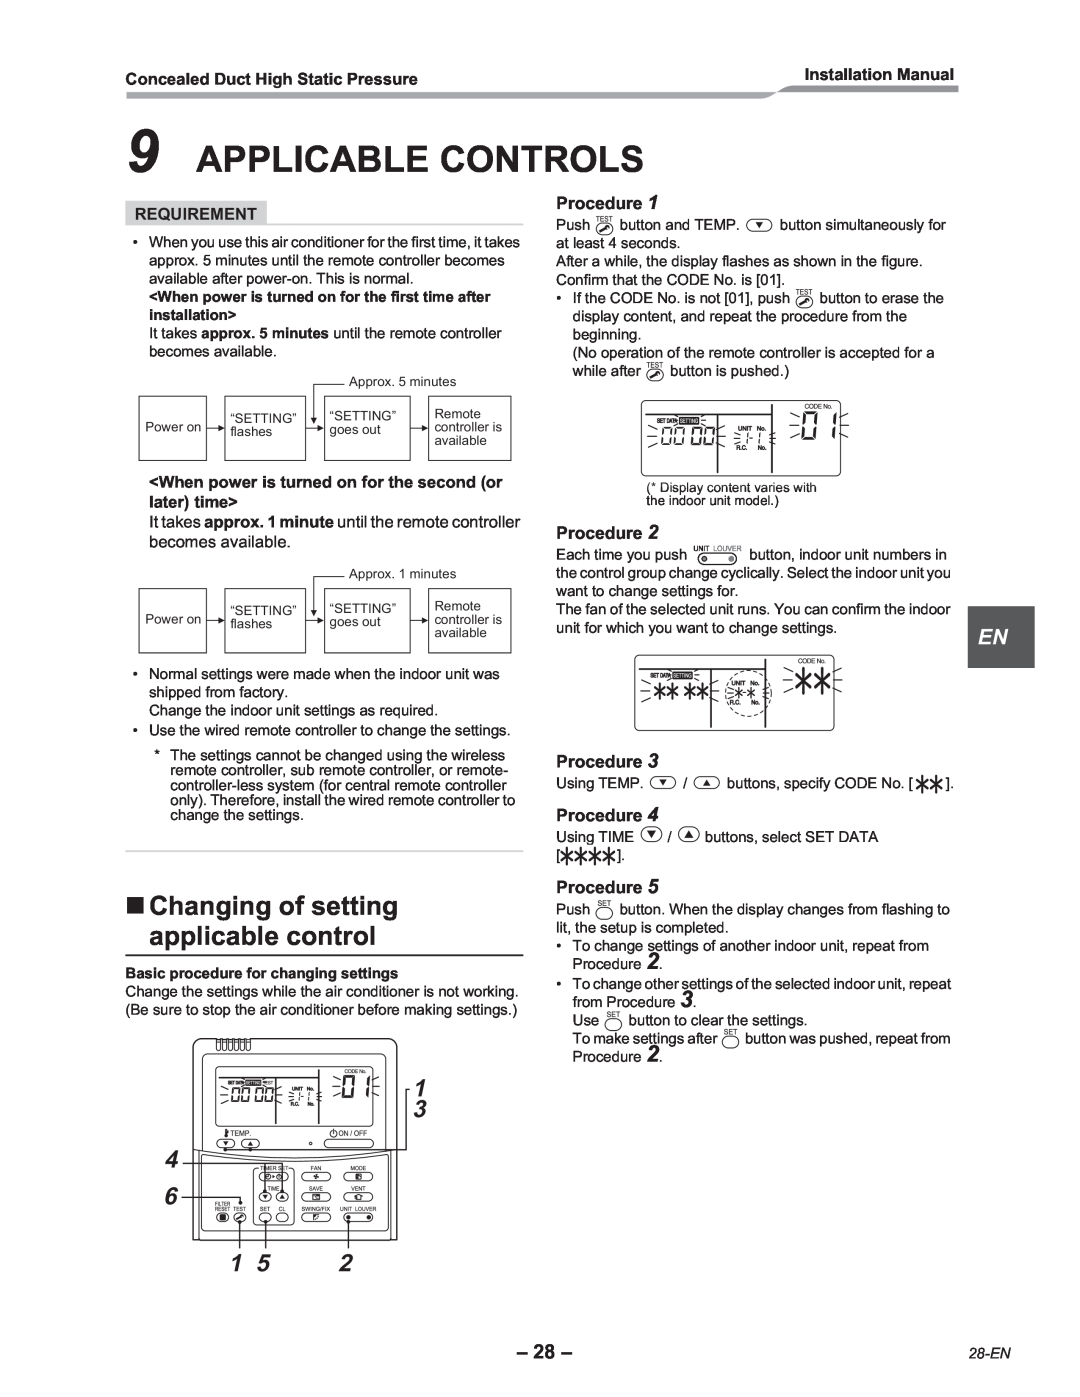 Toshiba RAV-SM2242DT-E Applicable Controls, Changing of setting applicable control, Procedure, Installation Manual, 28-EN 